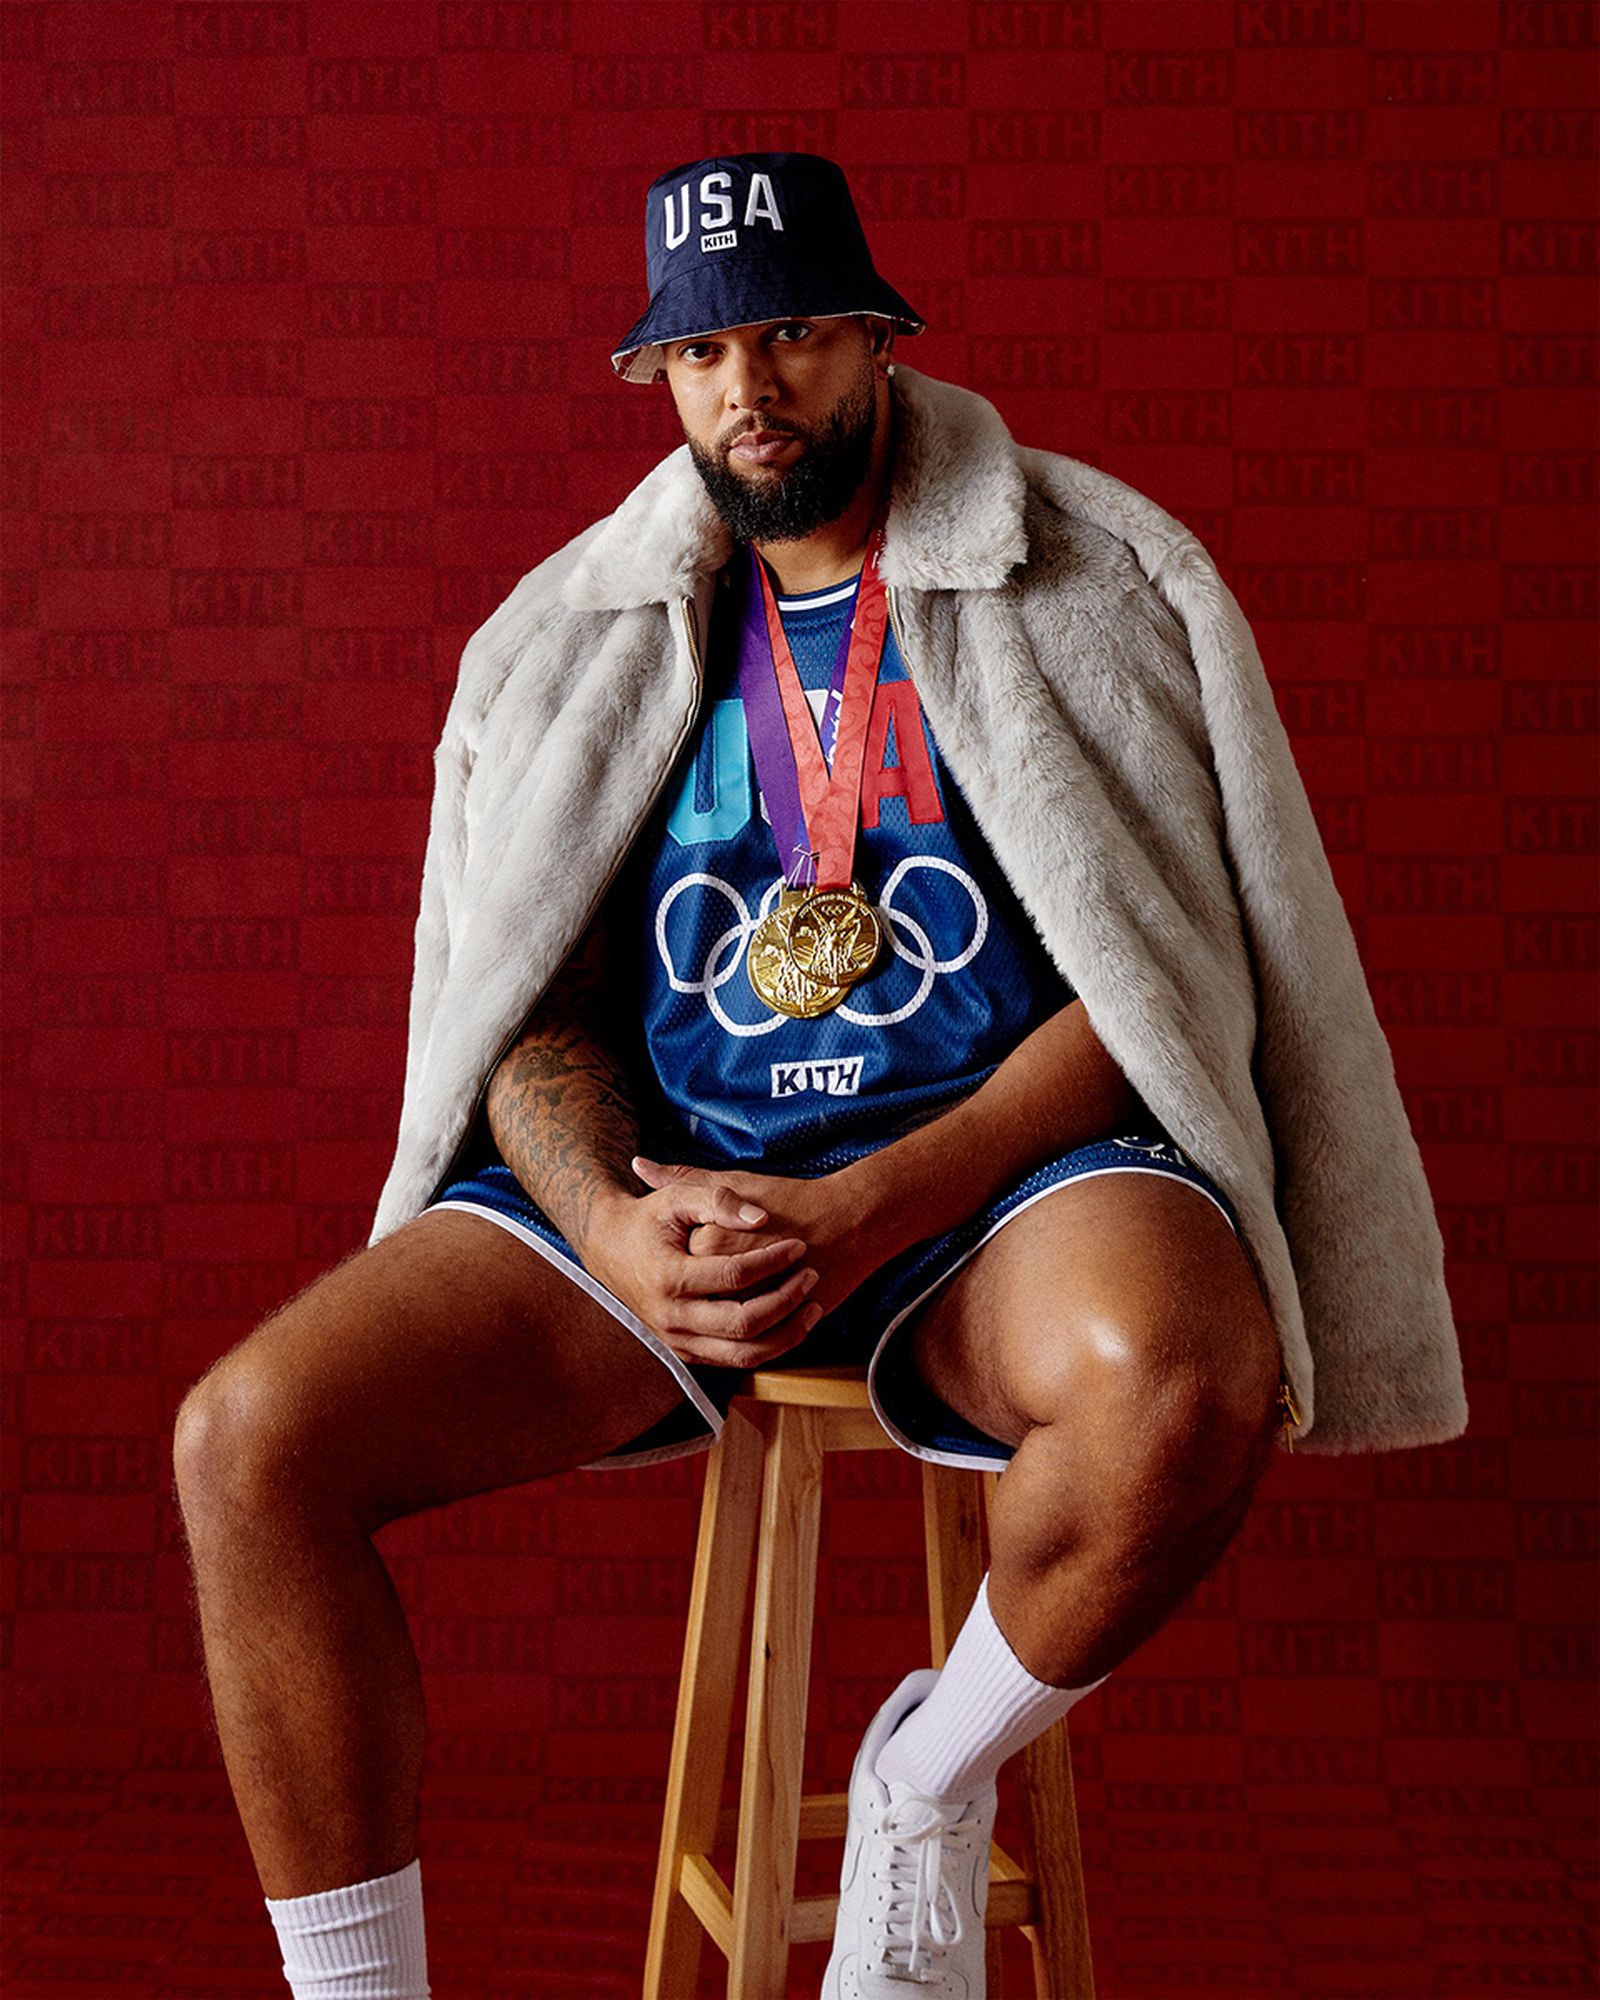 KITH 2021 Olympics Team USA Apparel Collection Campaign